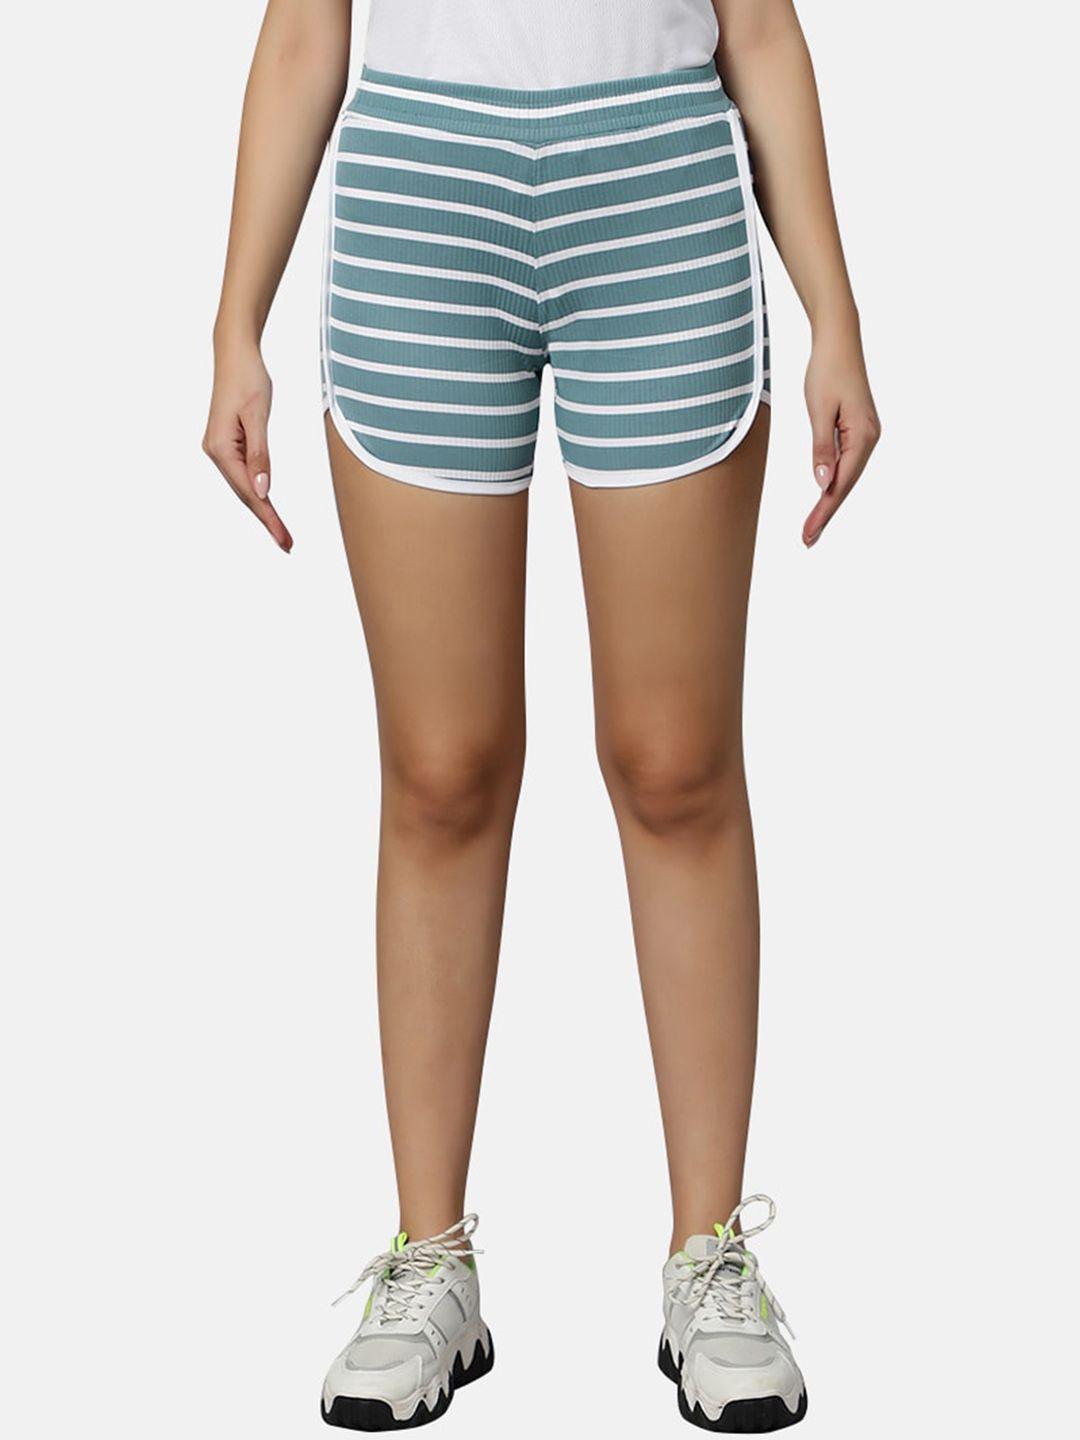 omtex-women-grey-striped-outdoor-with-technology-shorts